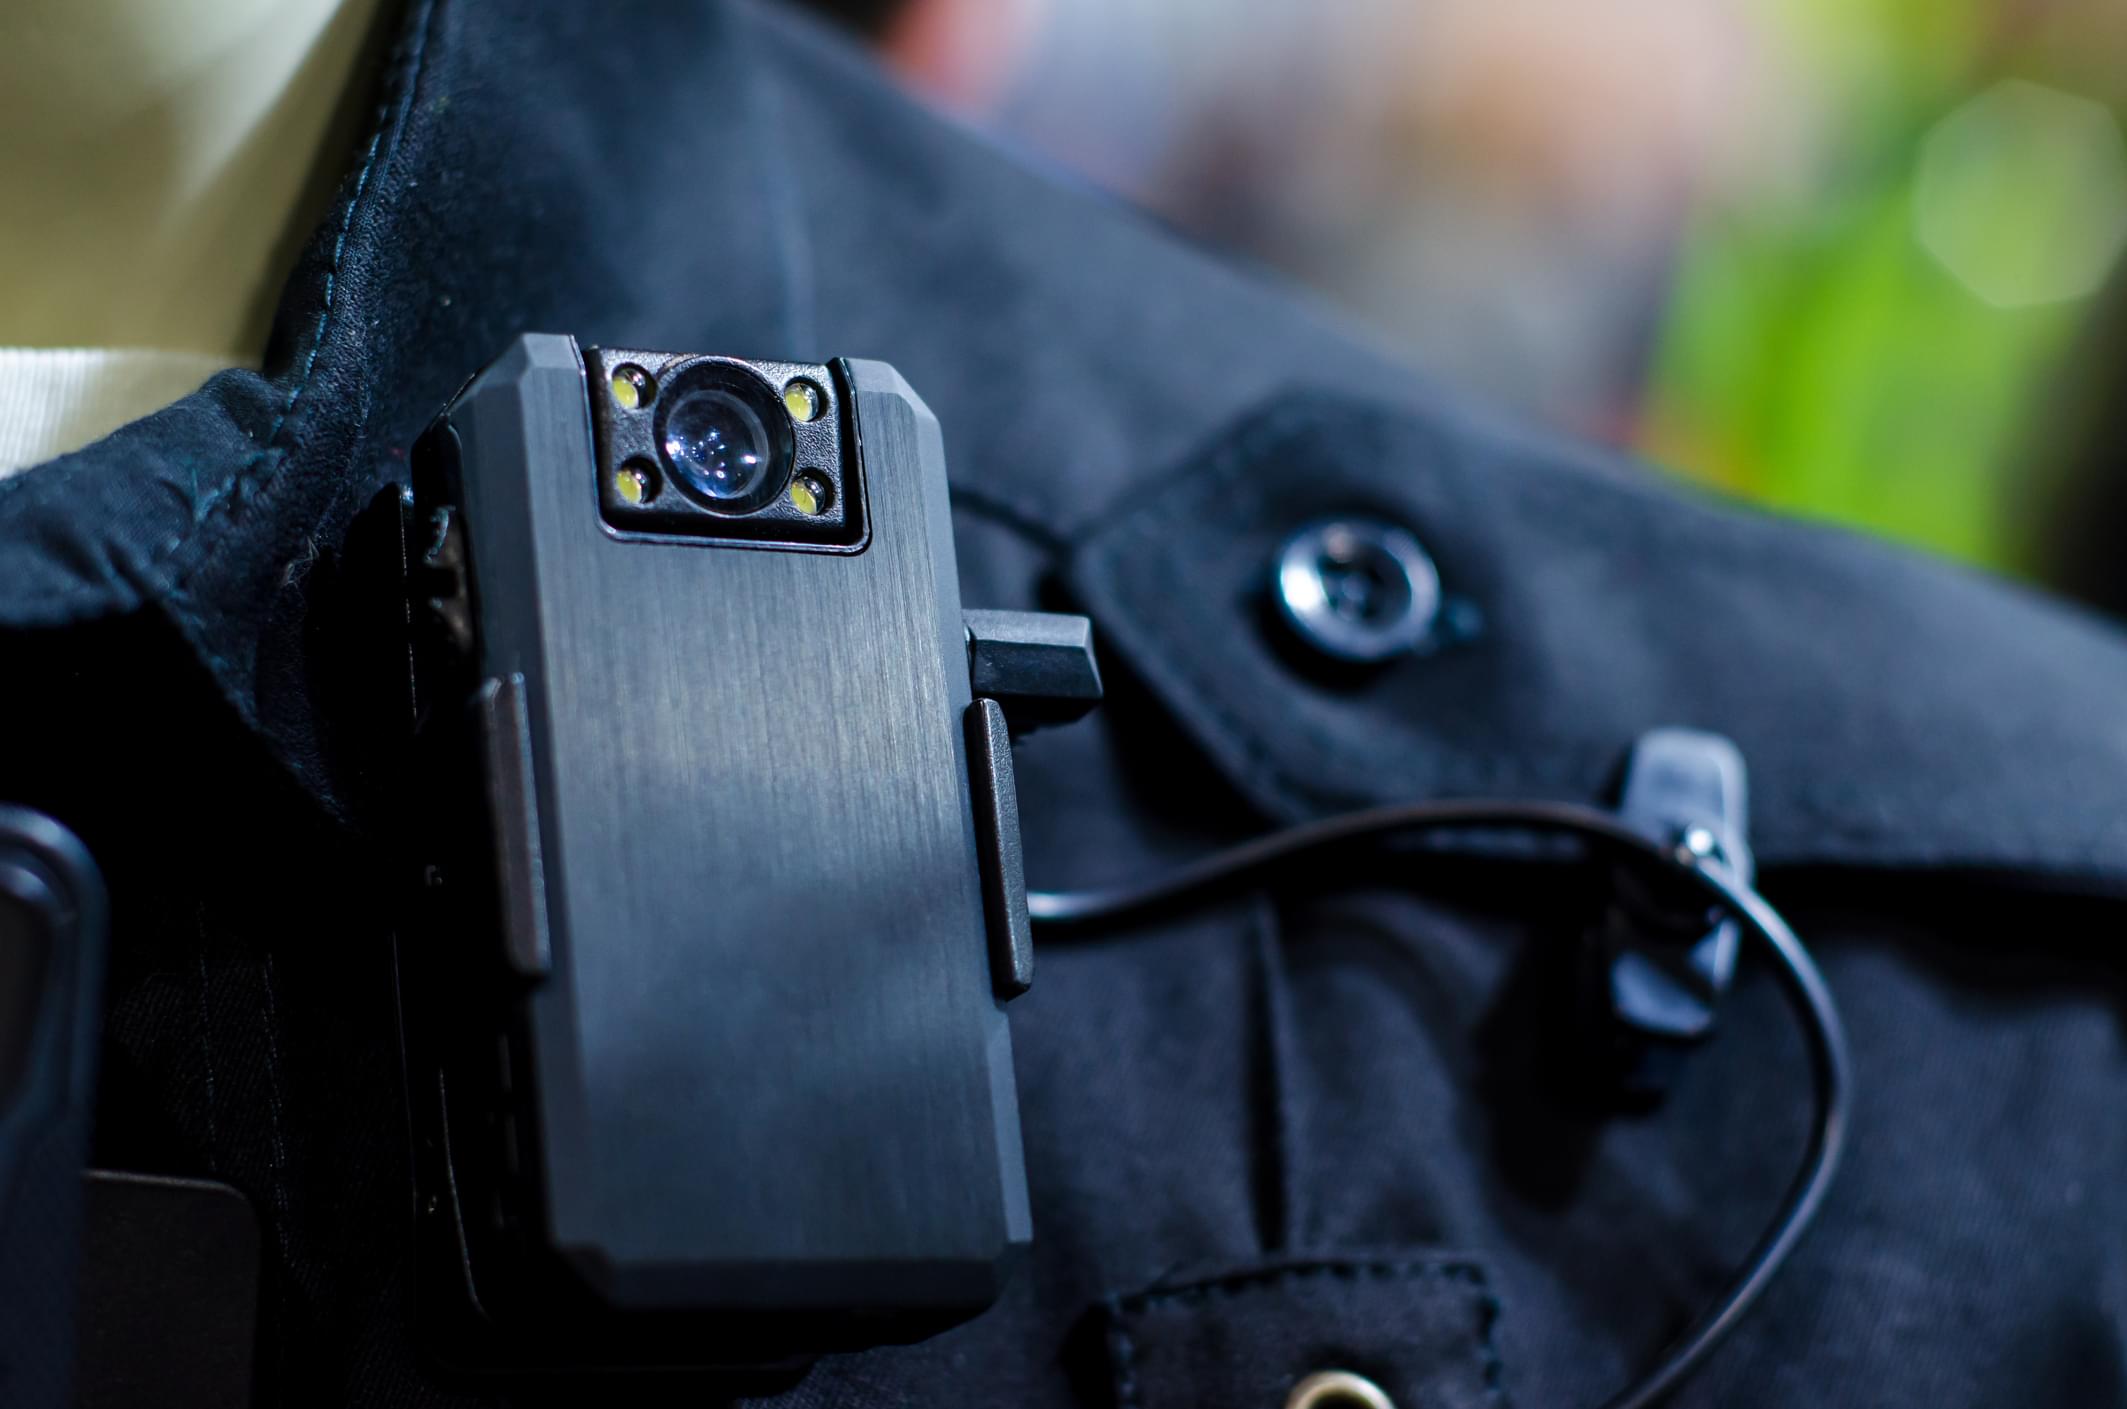 Melissa in the Morning: A Need of Body Cams